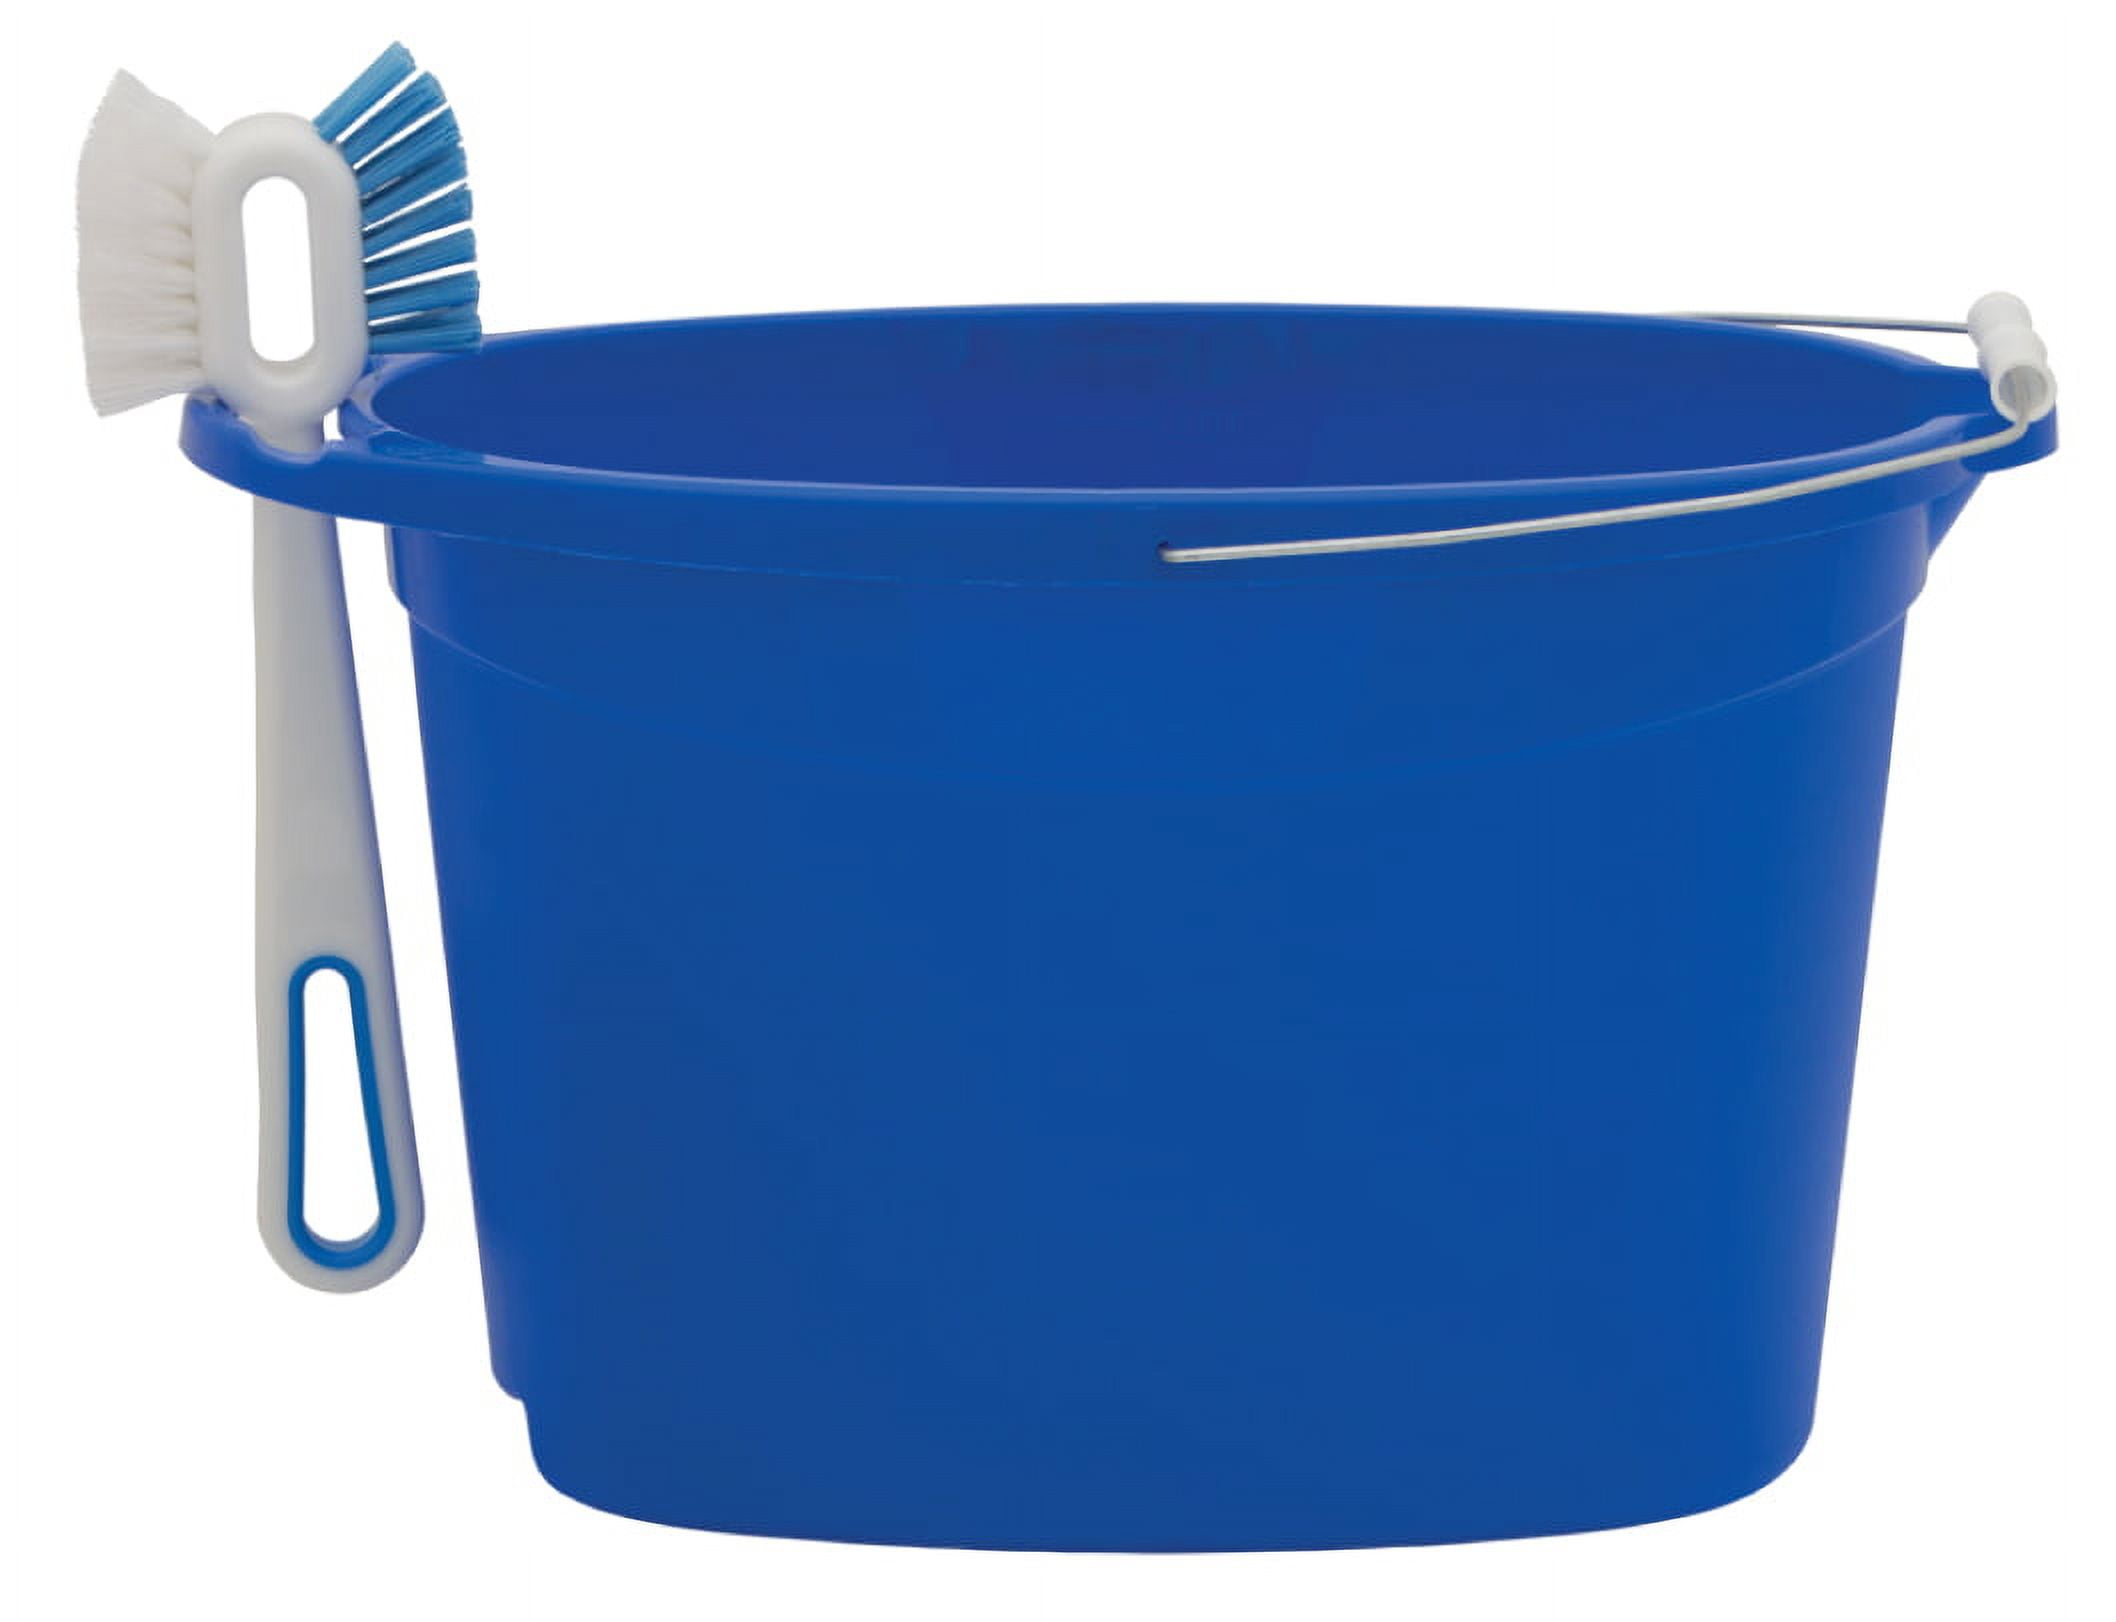  Buckets for Cleaning, Plastic Round Bucket, Floor Mopping Water  Bucket, 2 Gallon Cleaning Bucket, Pail with Spout, Bath Bucket, Bucket for  Bathroom, Bucket with Spout, Pails and Buckets 4 Colors Asst 